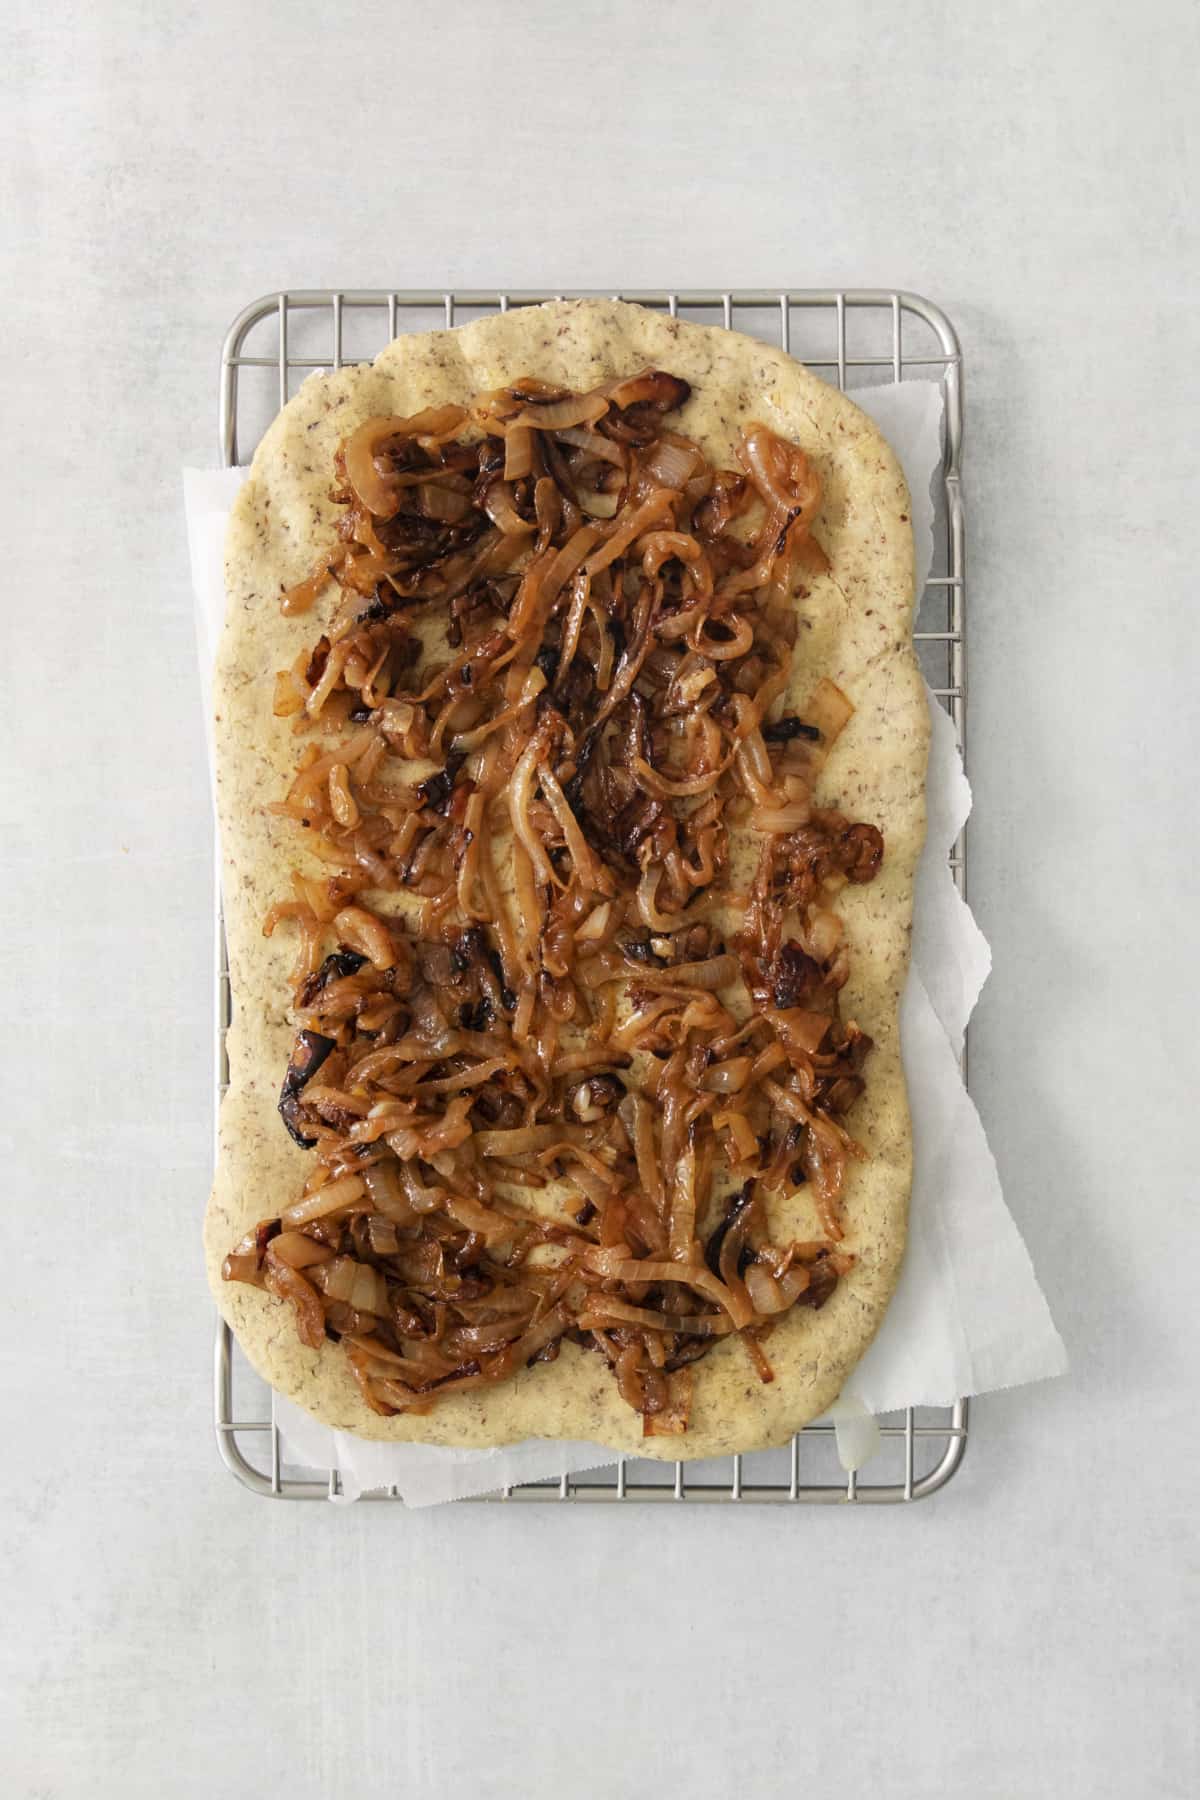 caramelized onions layered on a pizza crust.